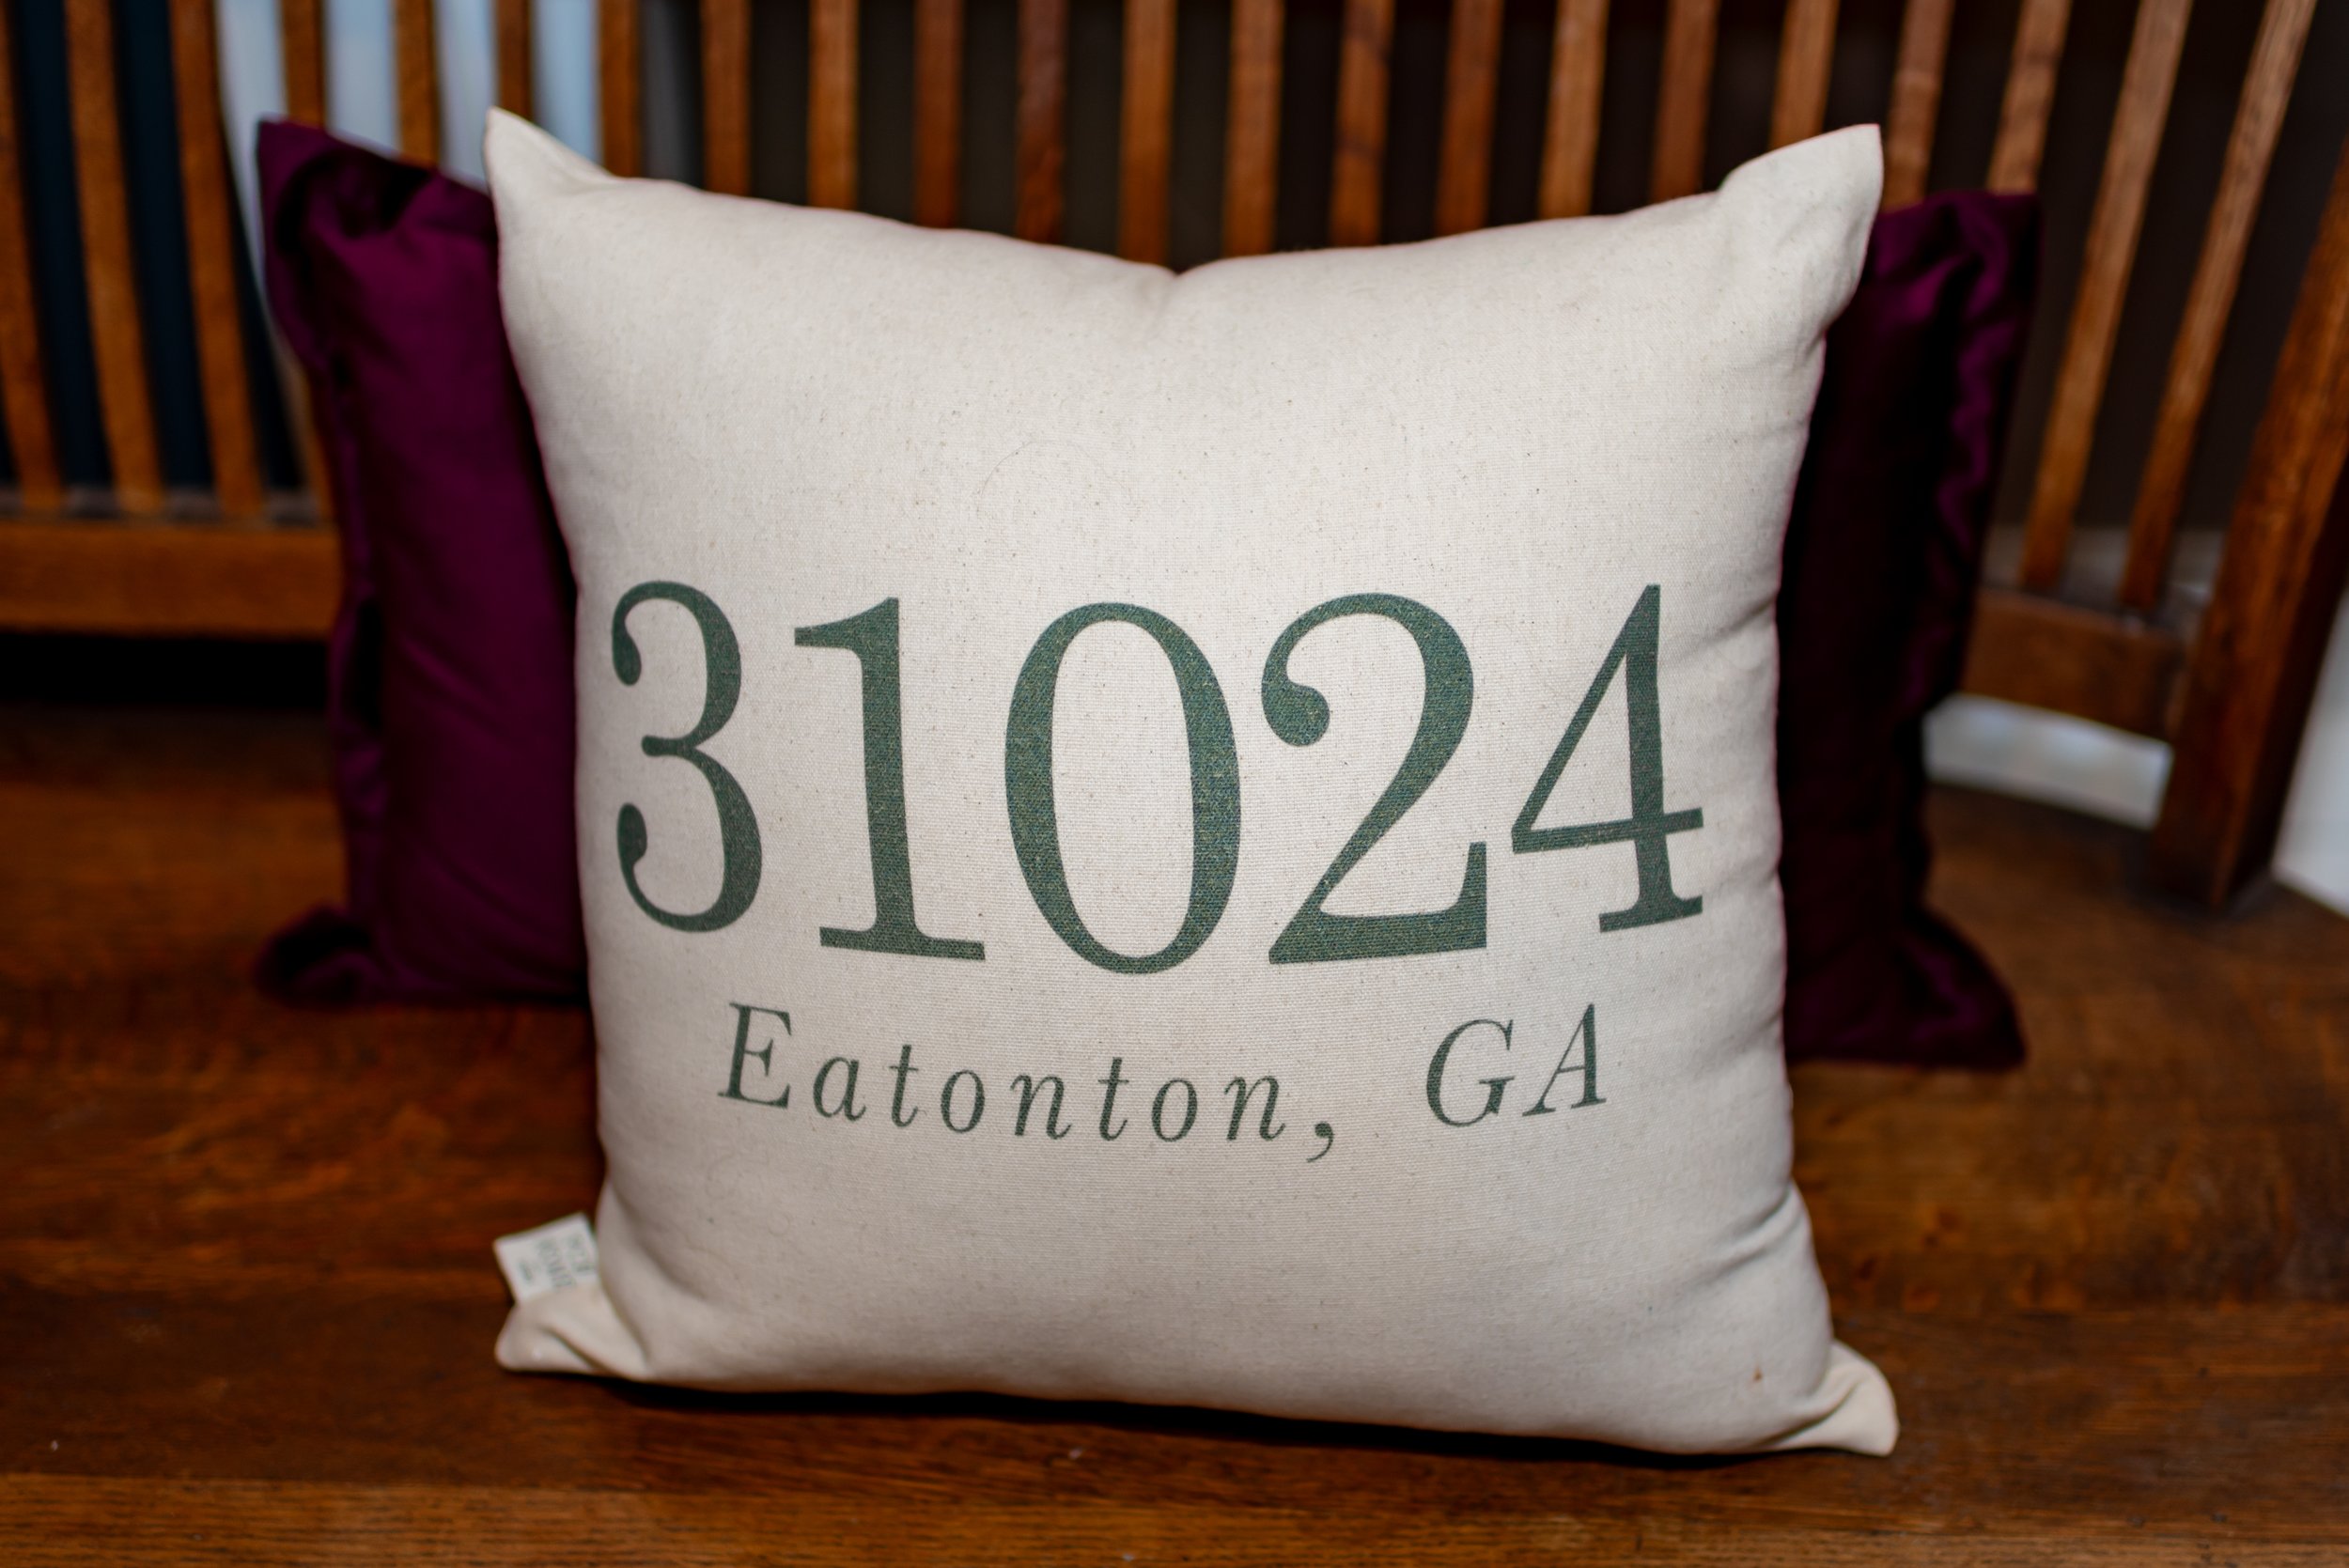 An Example of Merchandise At The Eatonton Welcome Center 